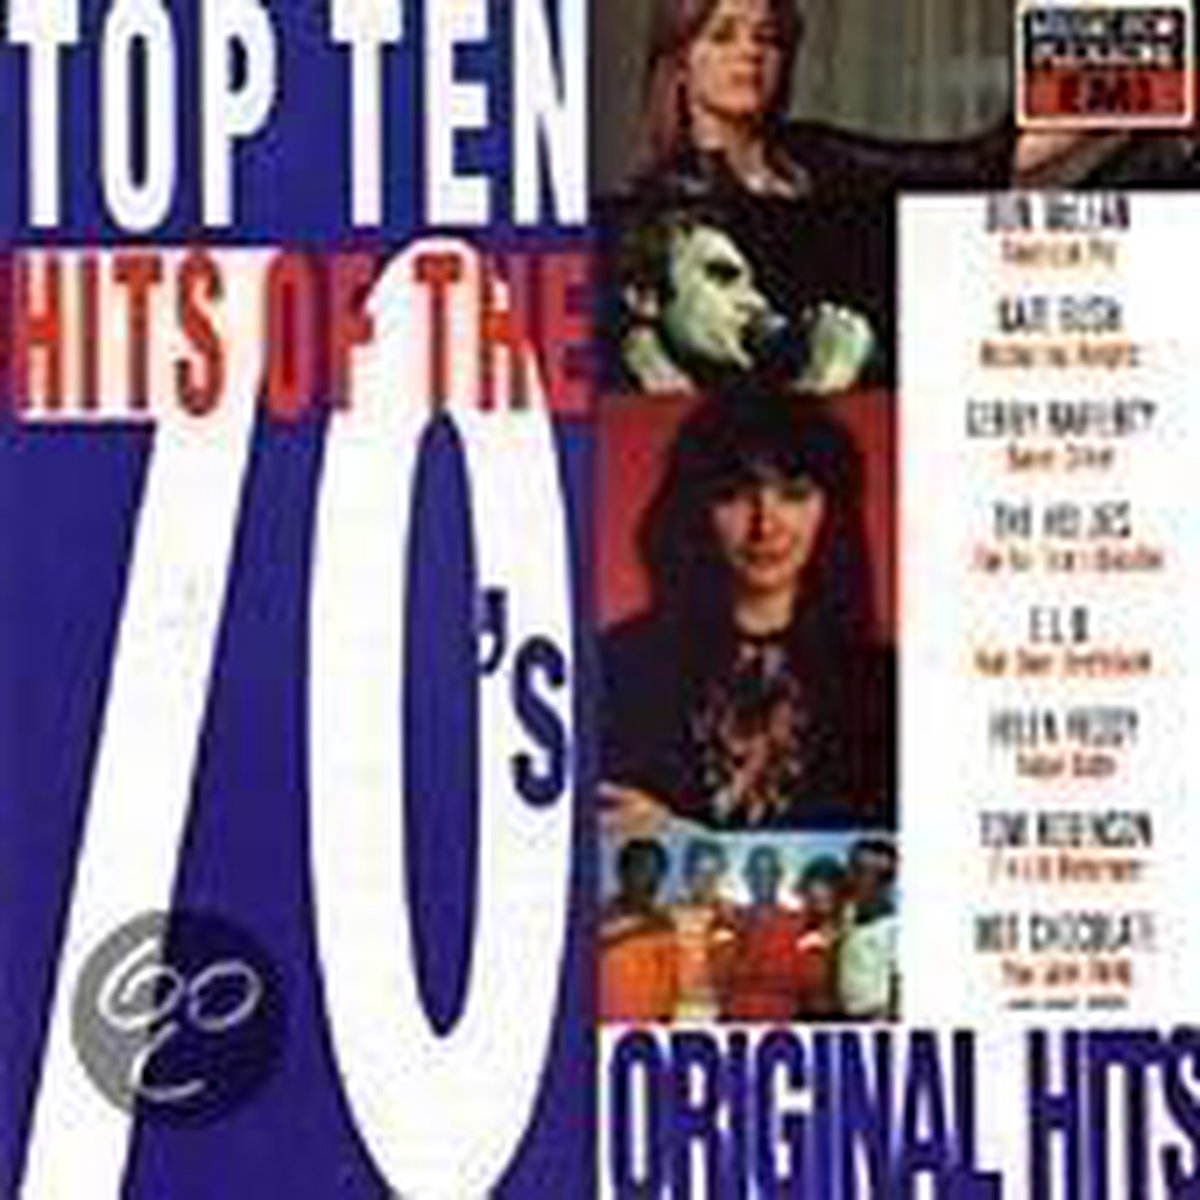 Top Ten Hits Of The 70's - various artists